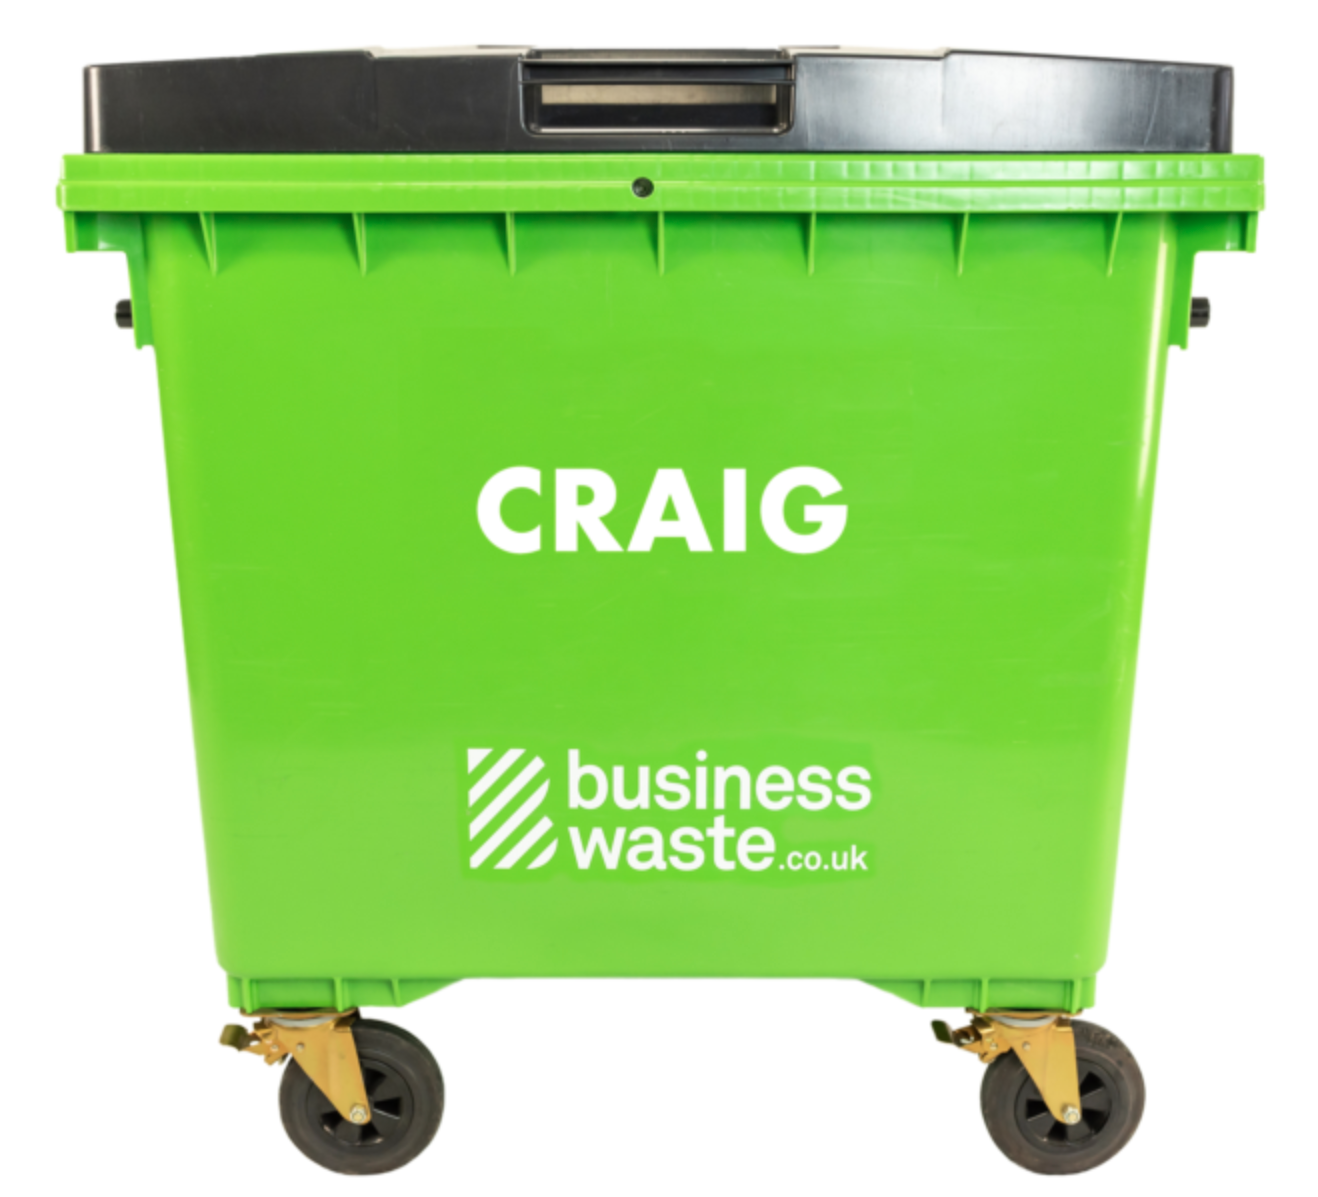 You can get your ex&#8217;s name printed on a bin just in time for Valentine&#8217;s Day, The Manc